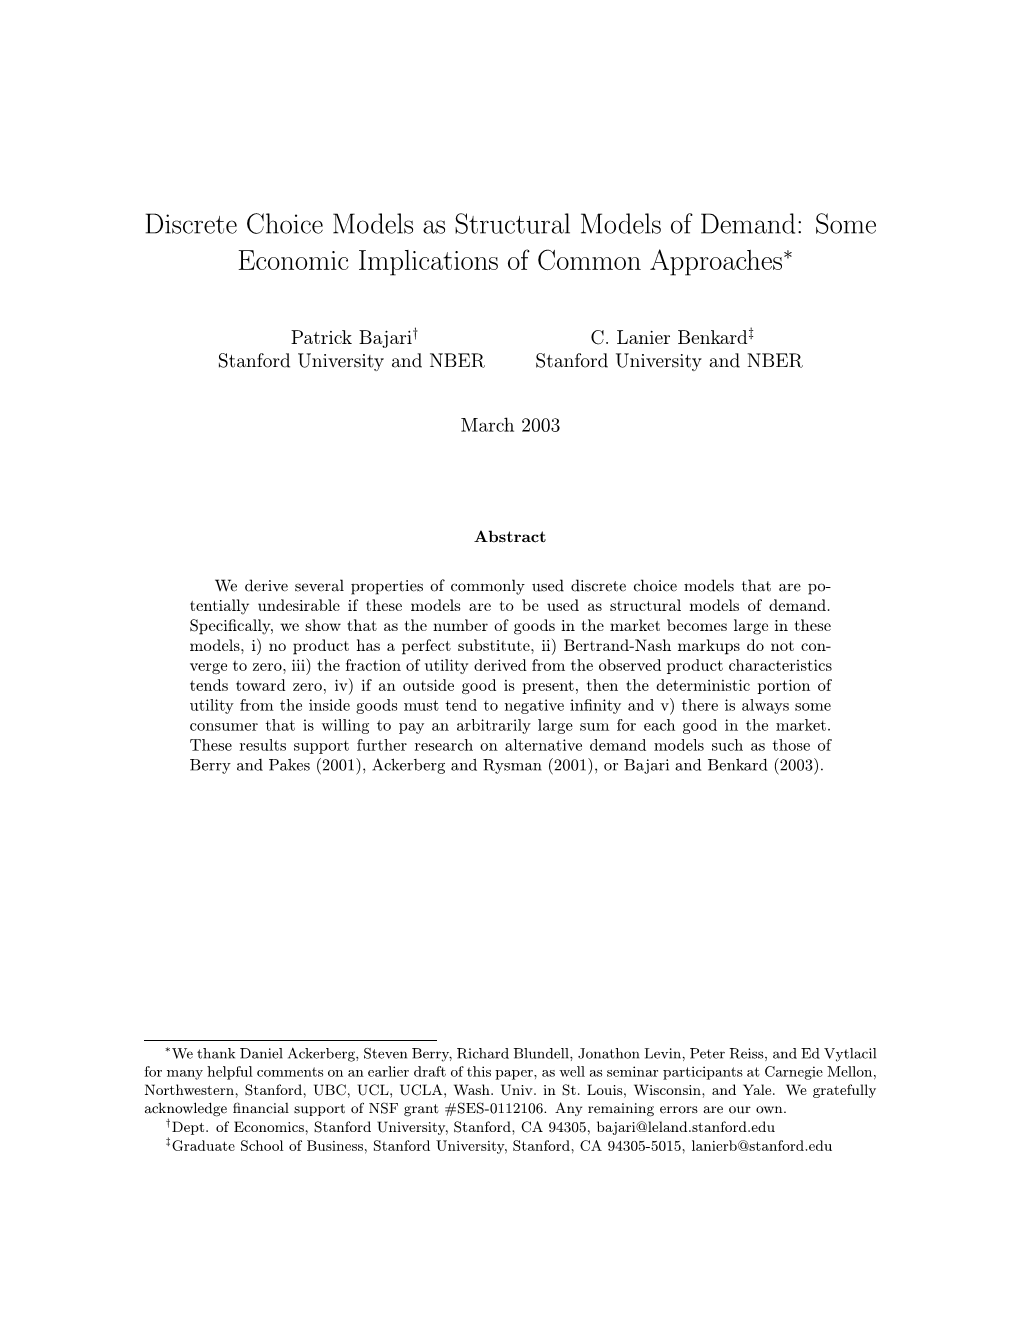 Discrete Choice Models As Structural Models of Demand: Some Economic Implications of Common Approaches∗